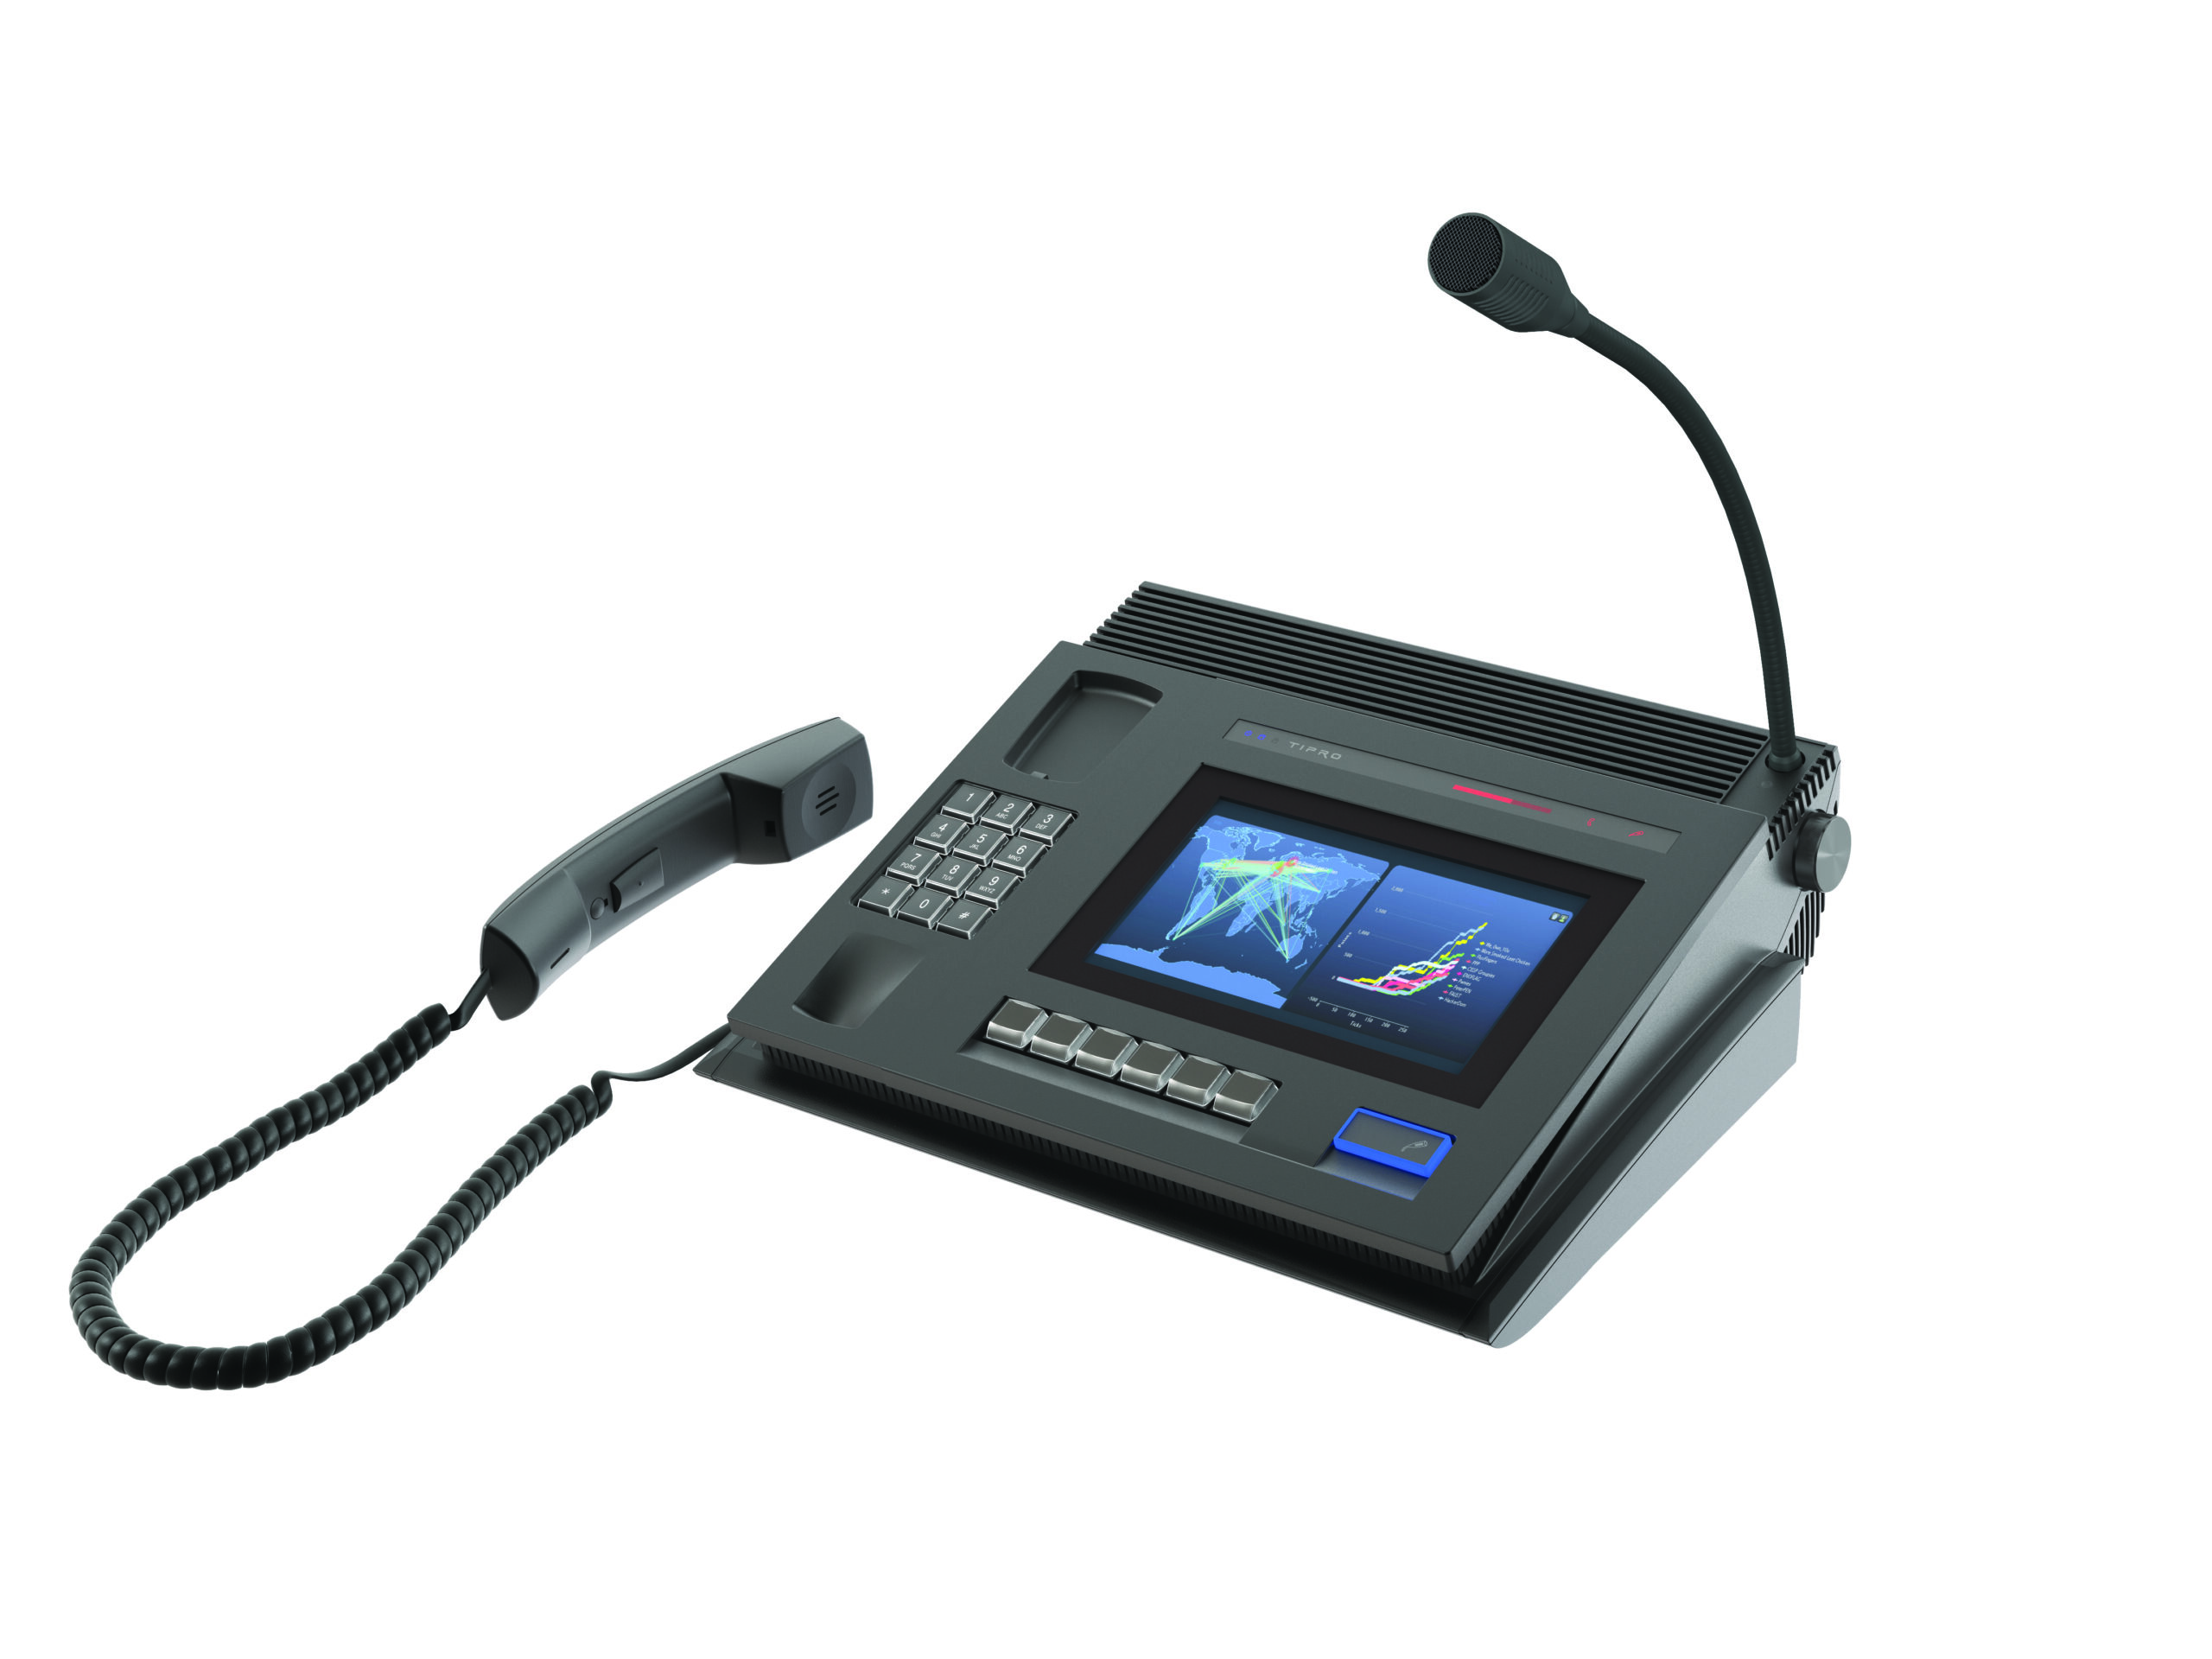 7.0'' Compact Touchcomputer with Integrated InterCom and Handset